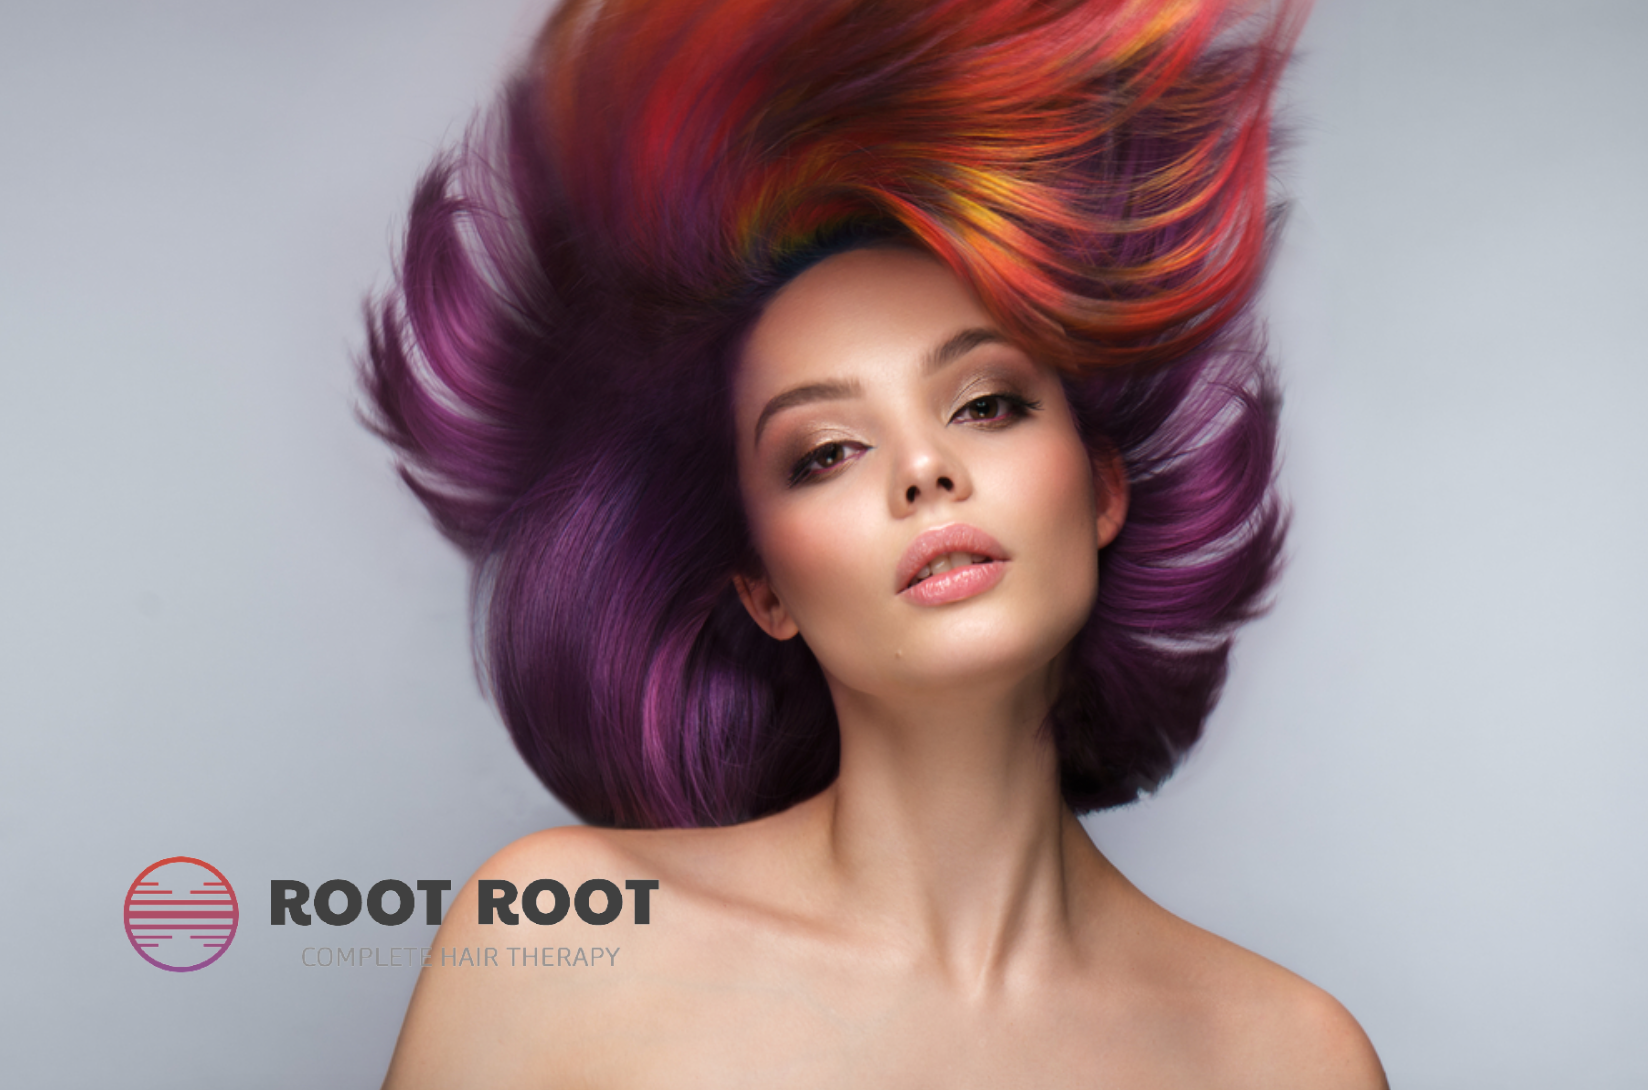 Get Your Best Hair Yet with the Incredible Root Root Hair Care System